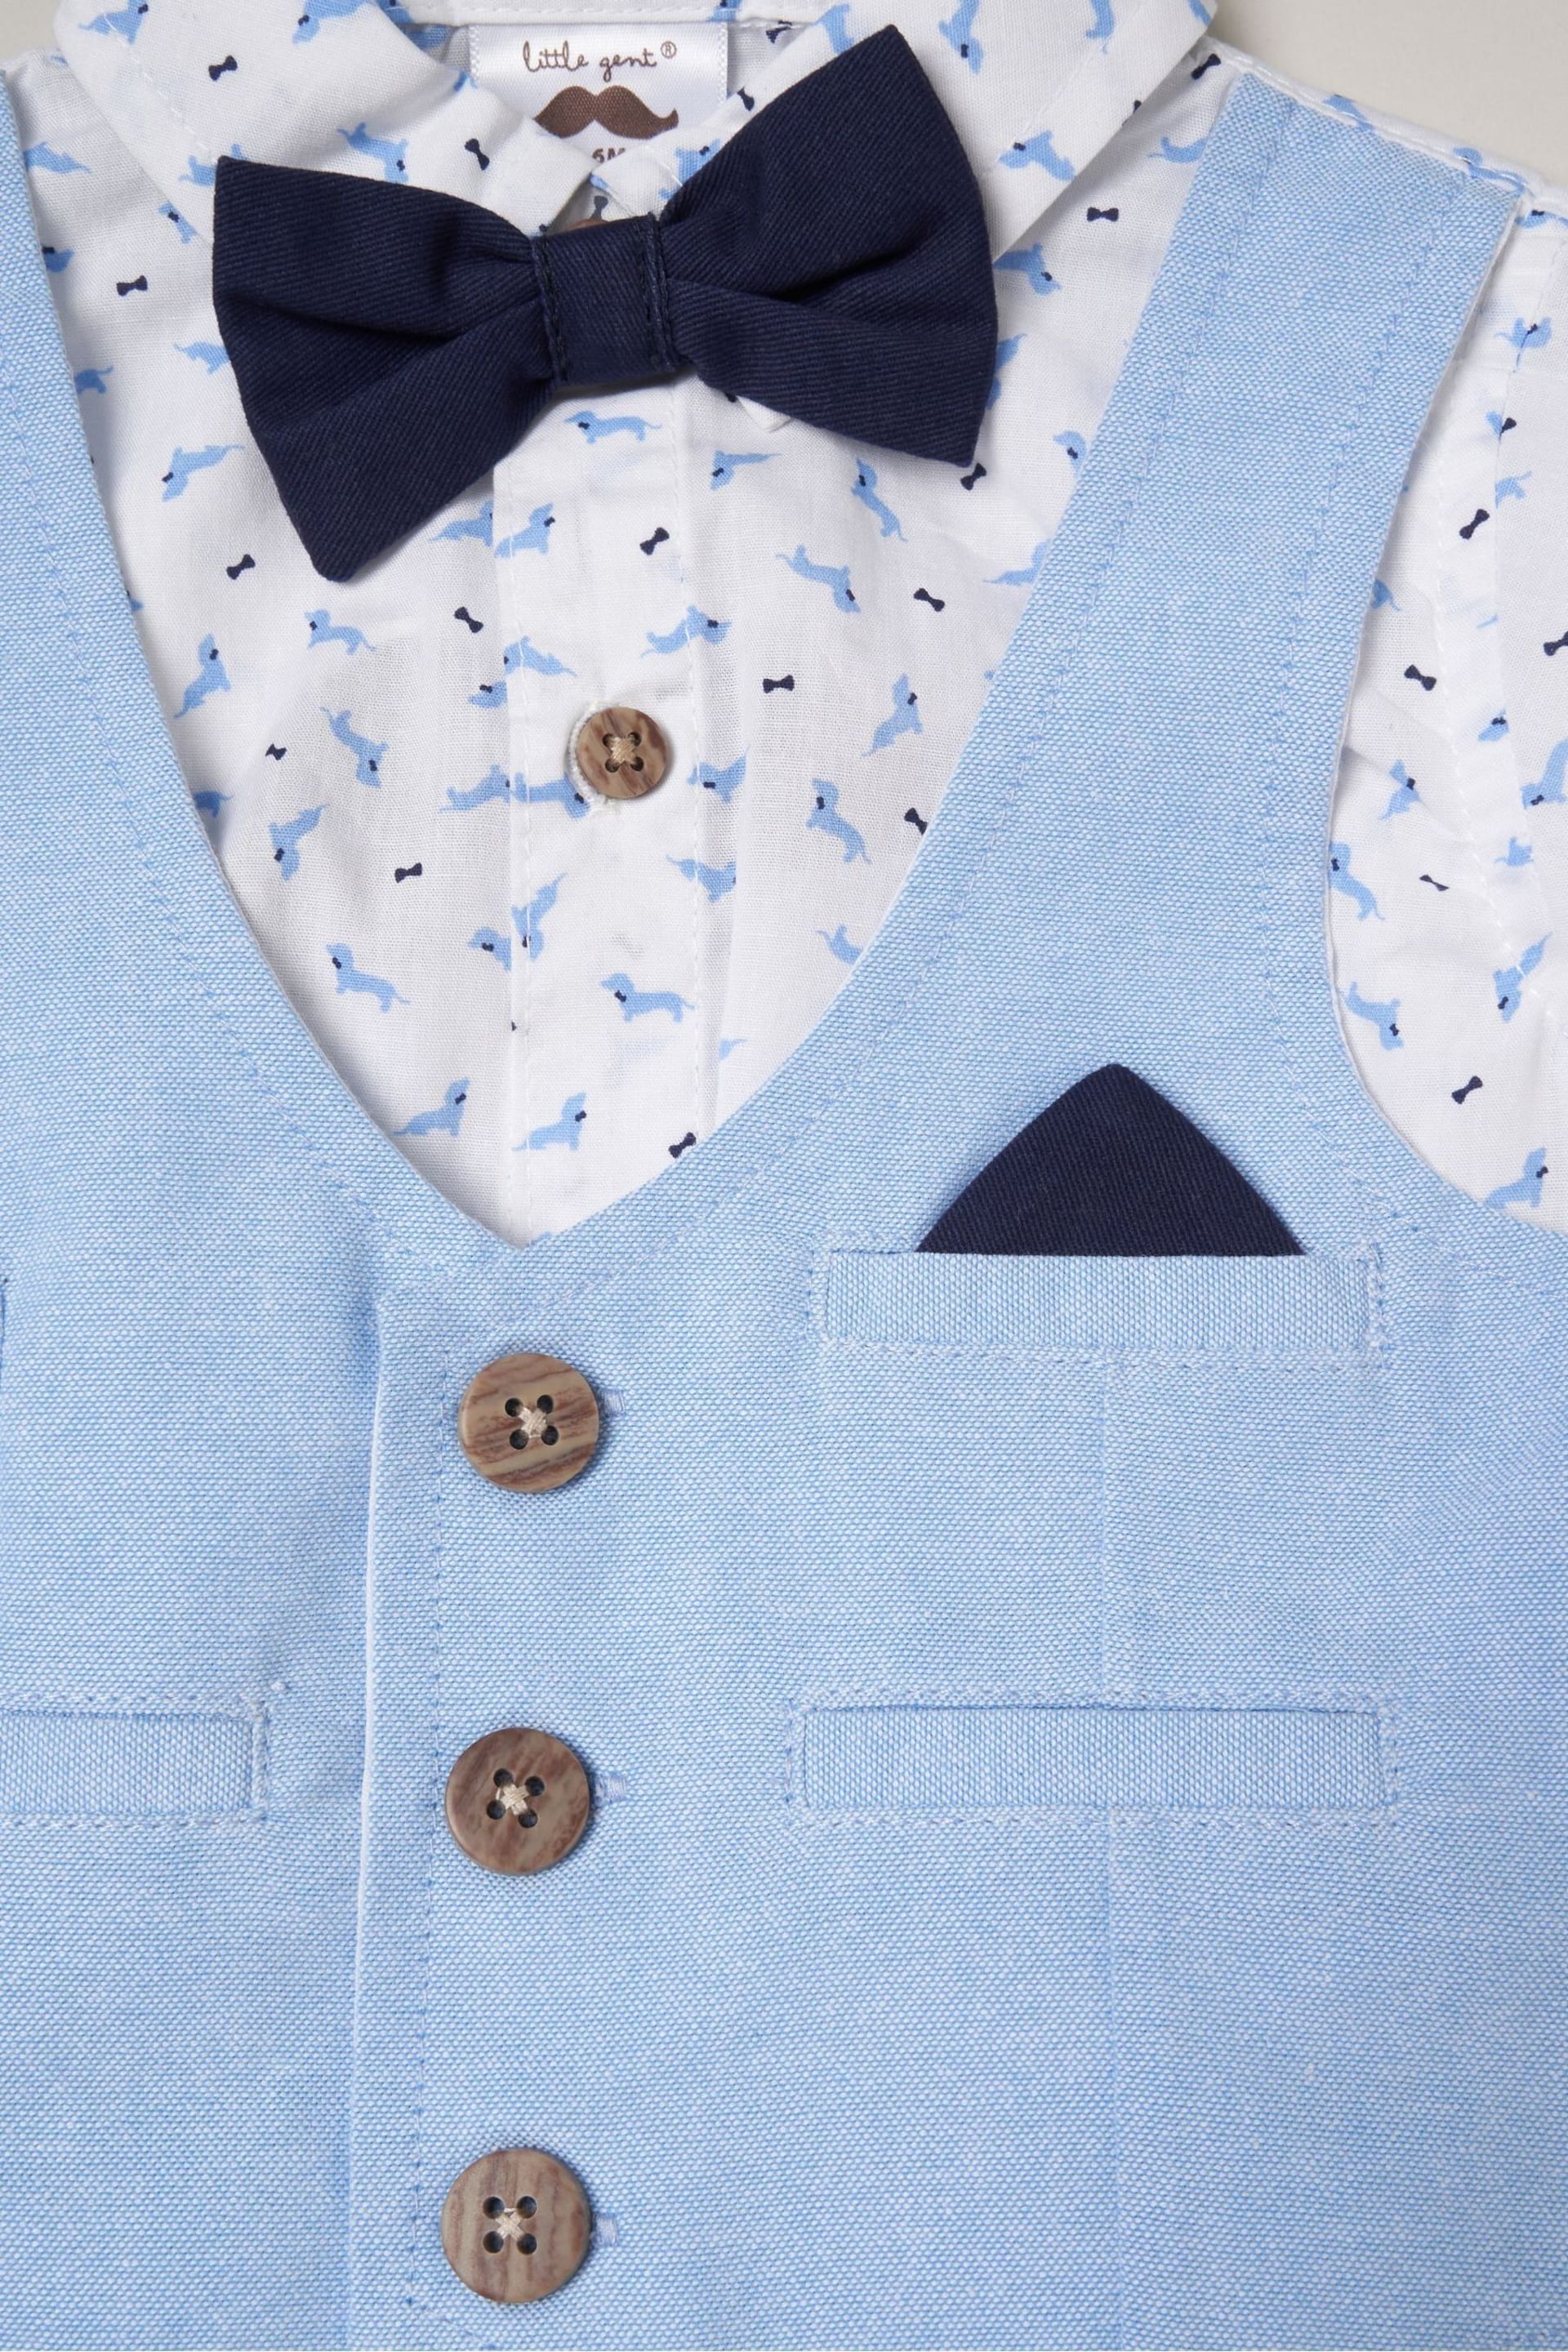 Little Gent Blue Shirt Style Bodysuit Shorts And Bowtie Outfit Set - Image 4 of 4